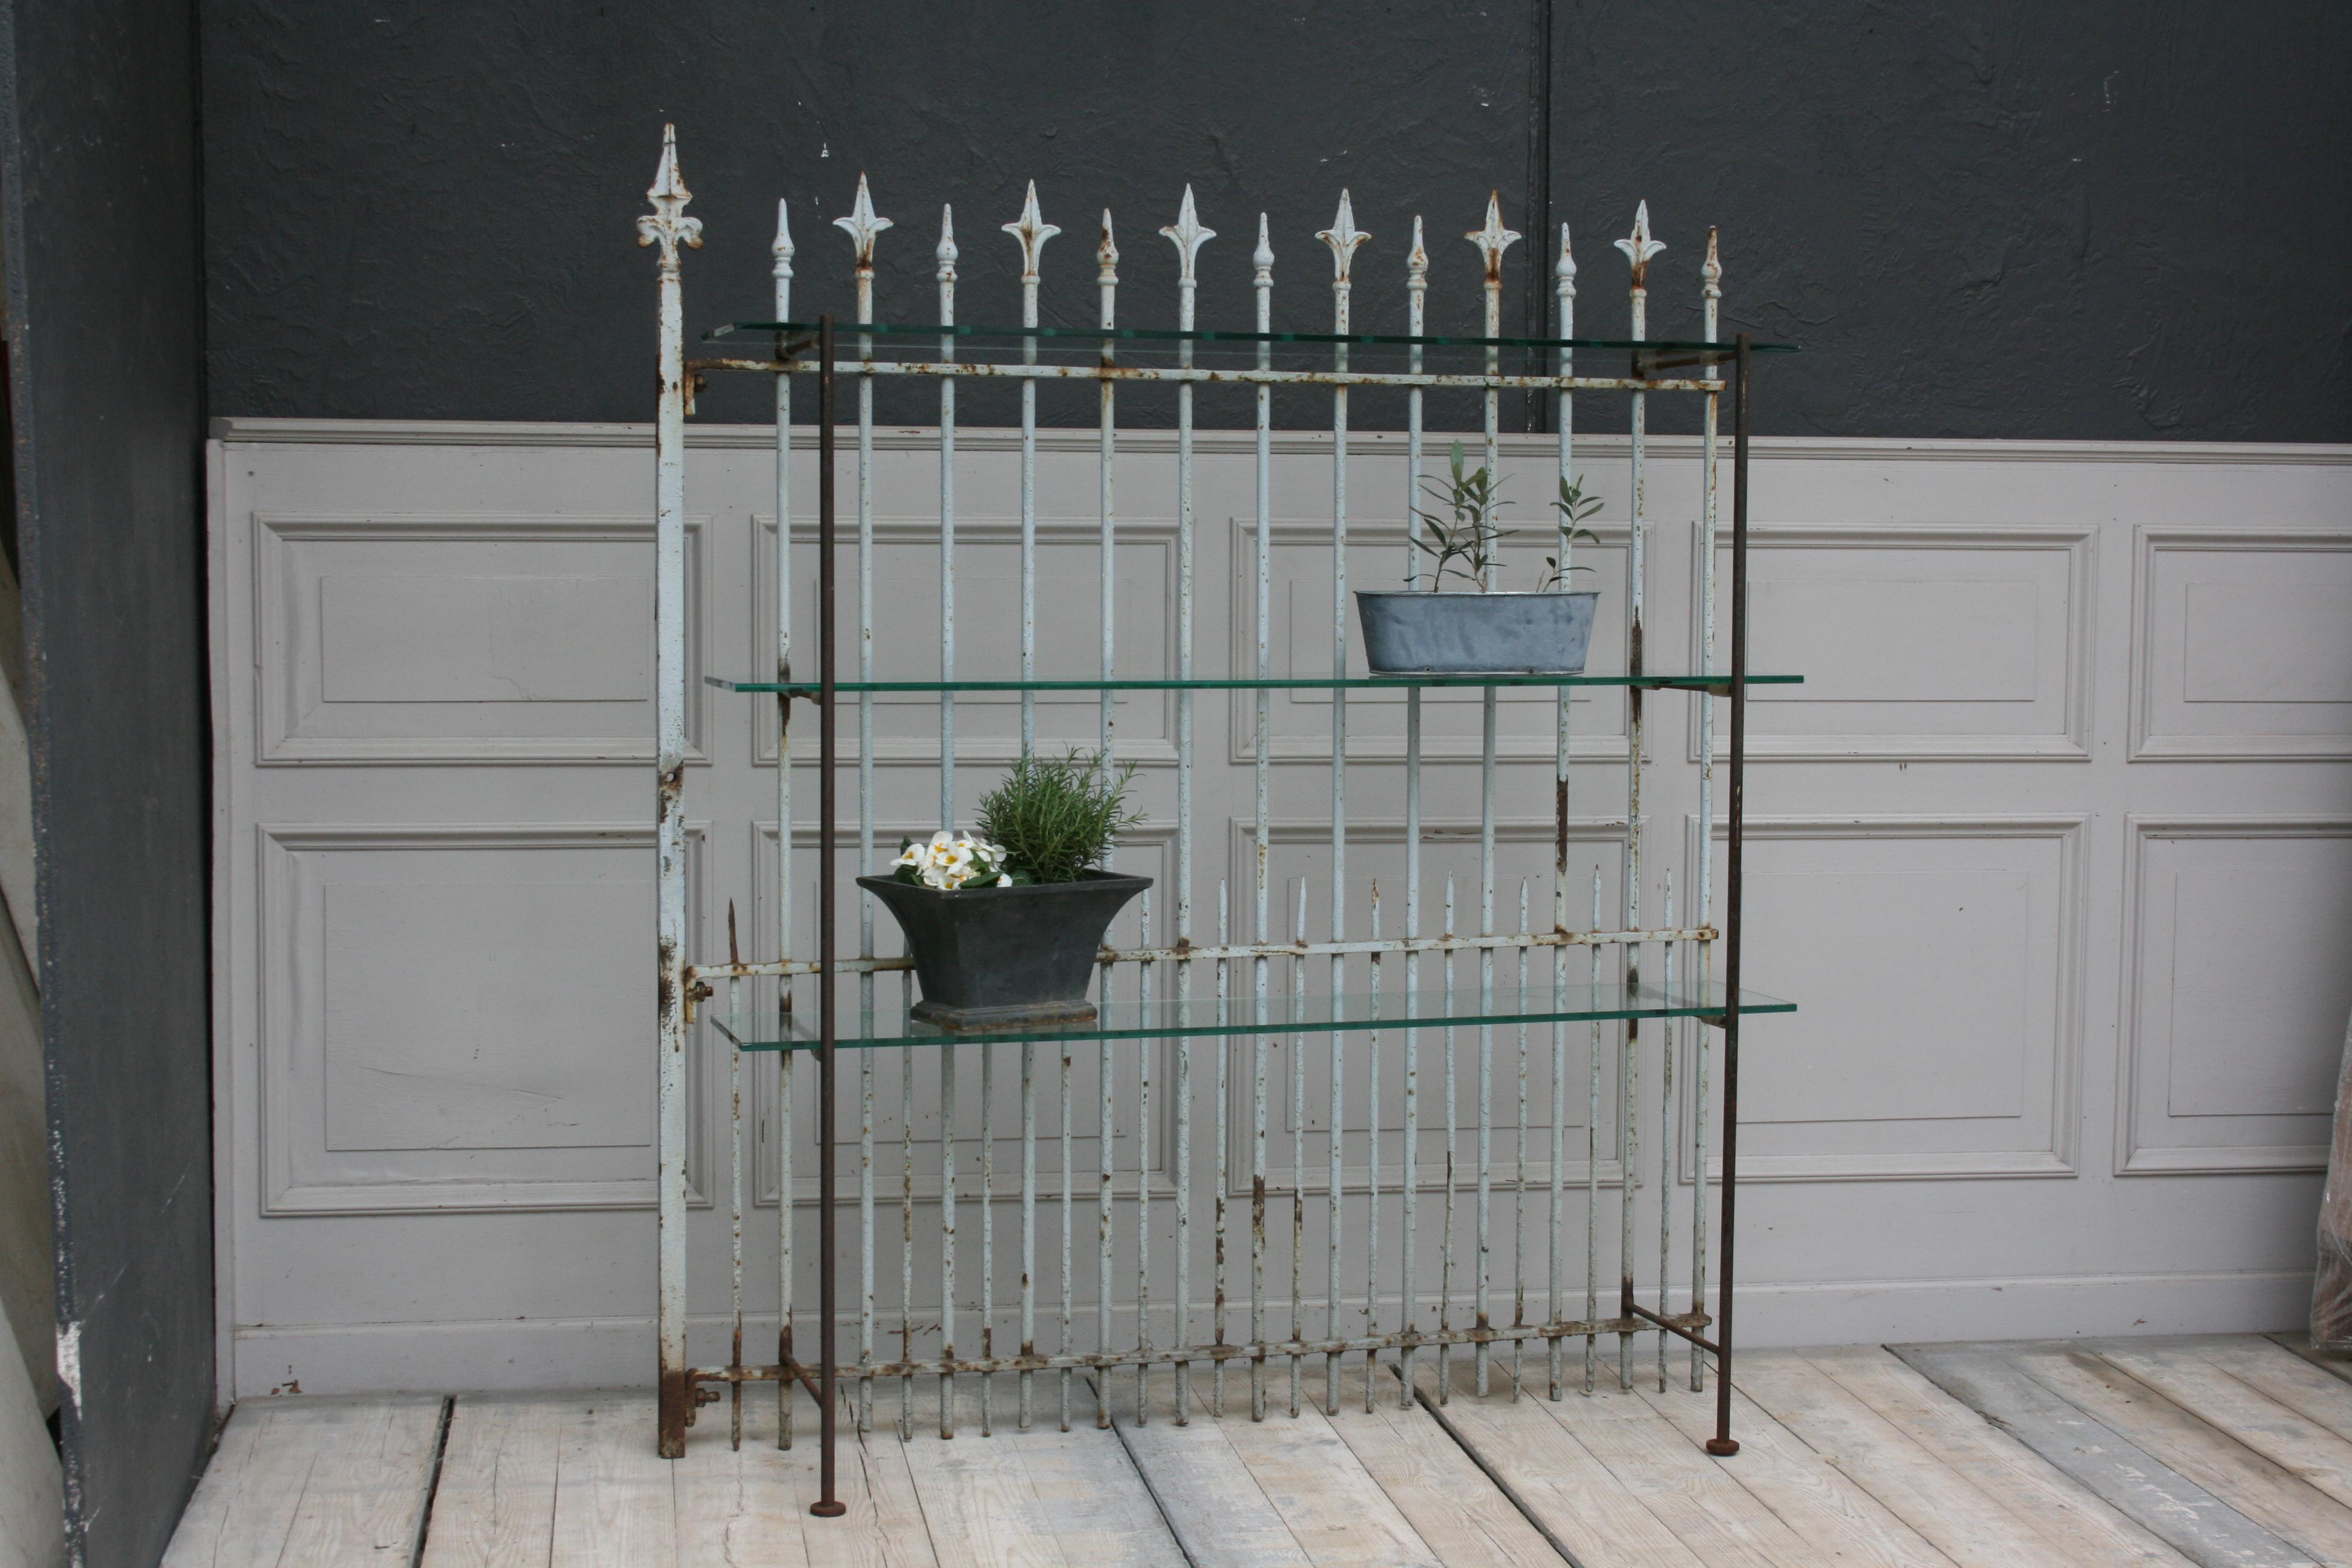 Unique shelf made of original old fence part with glass shelves. Ideal e.g. for garden and terrace.

Dimensions: 
159 cm high, / 62,59 inch
139 cm wide, / 54,72 inch
31 cm deep, / 12,2 inch.